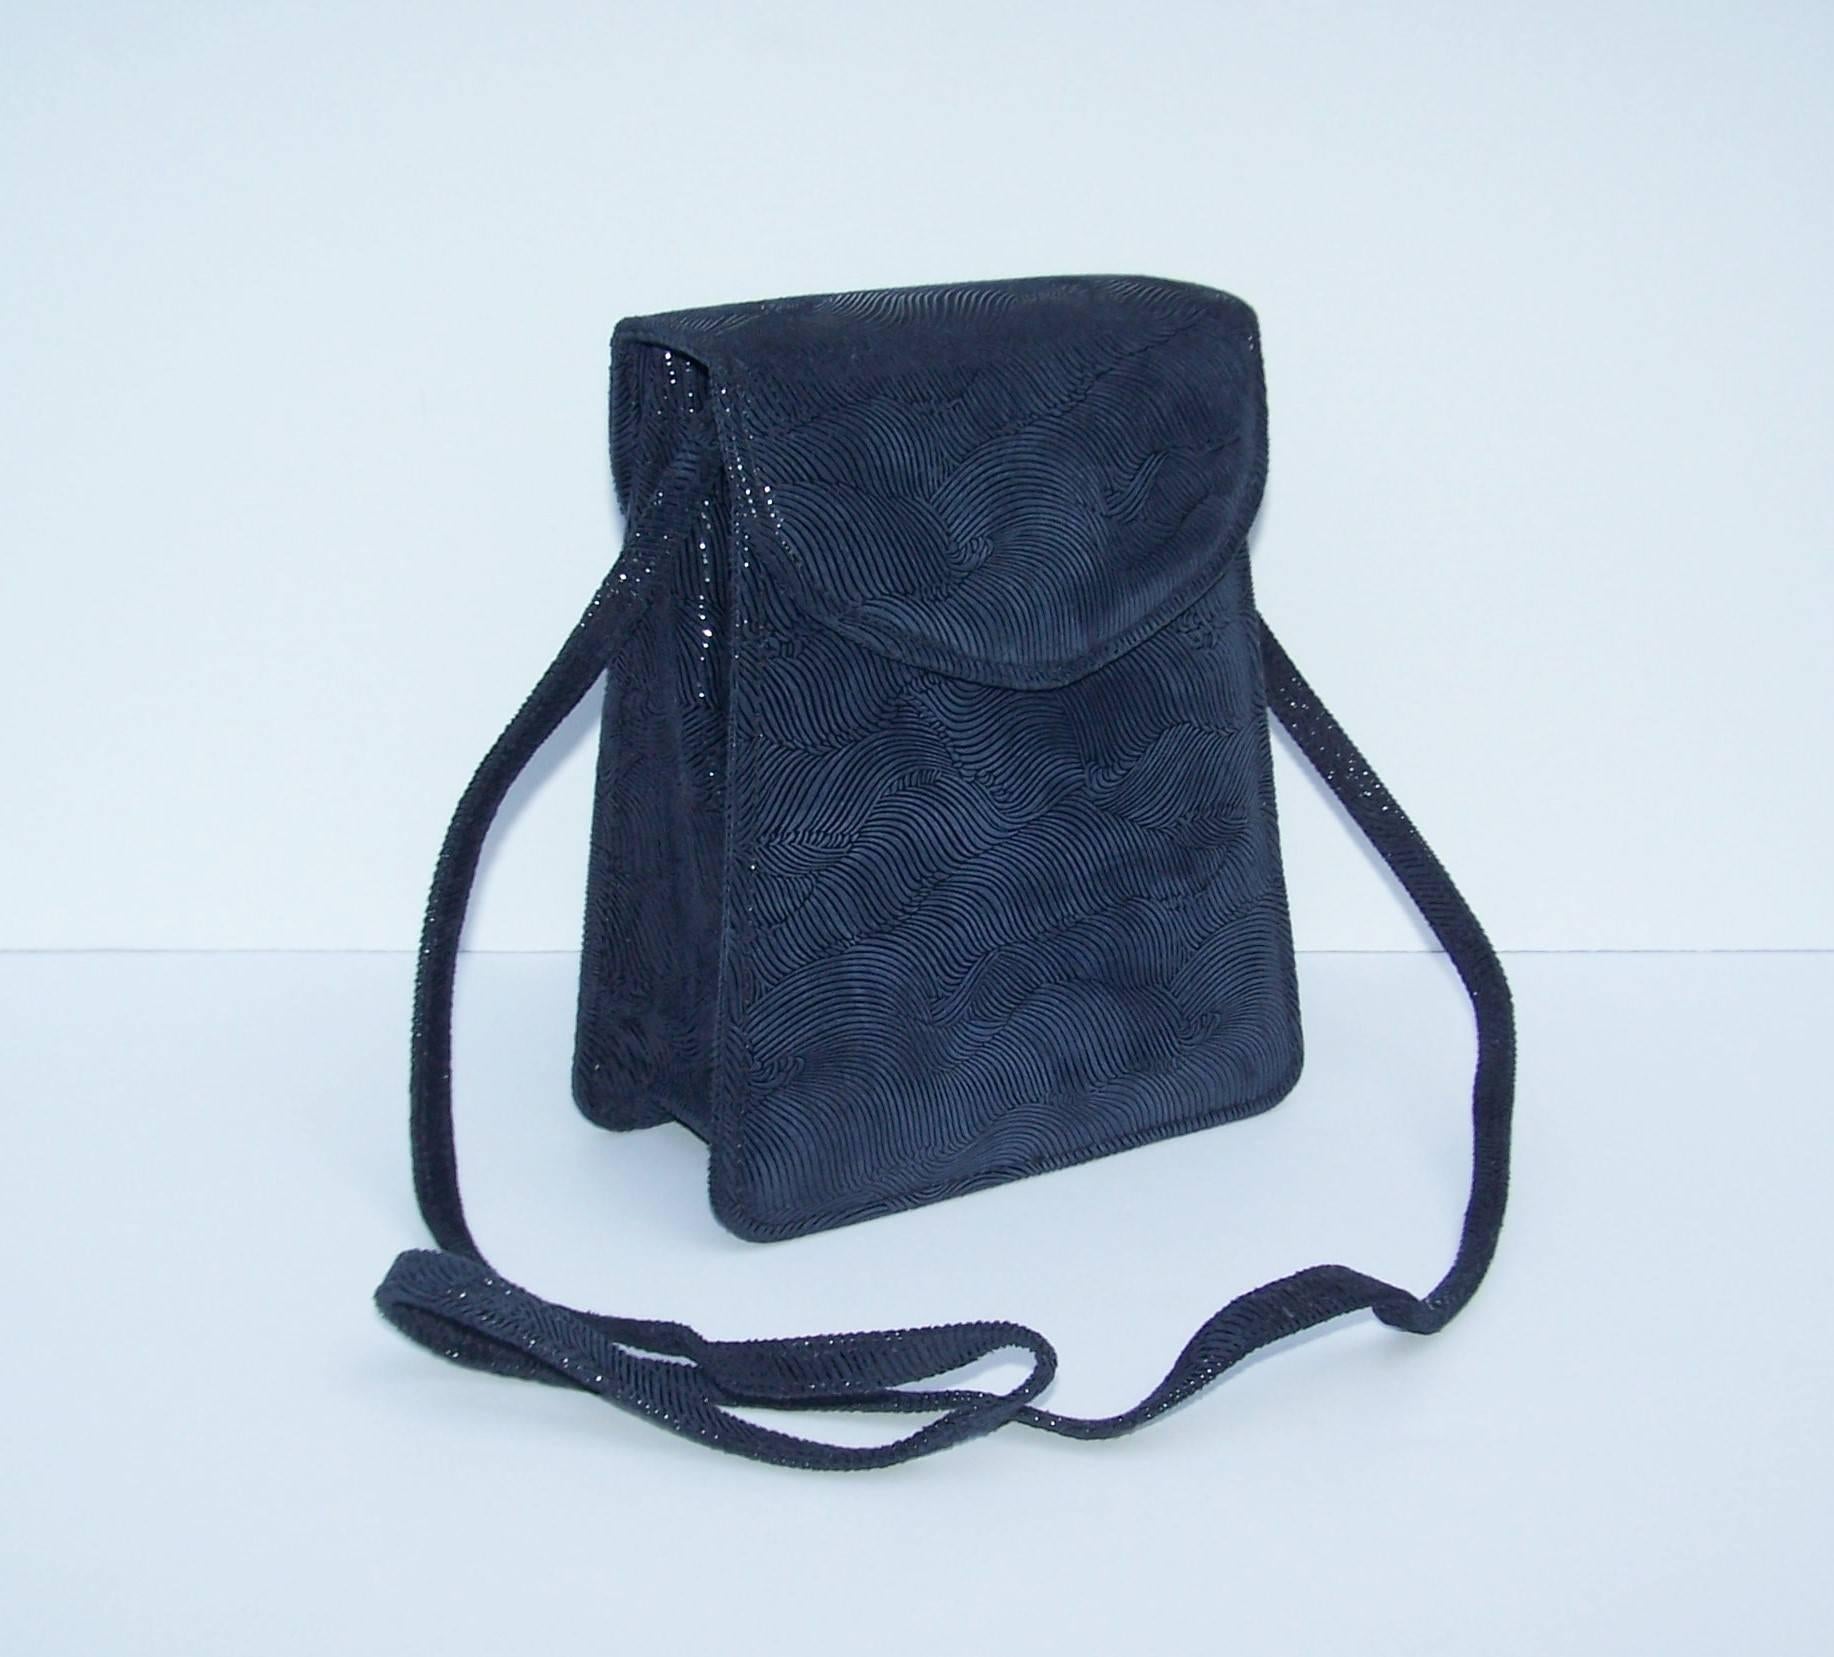 Michelle & Michael LaLonde create wearable art handbags featuring sophisticated design and unique details.  This navy blue suede leather handbag is silk screen printed to create a design that catches the light and mimics a wave pattern.  The